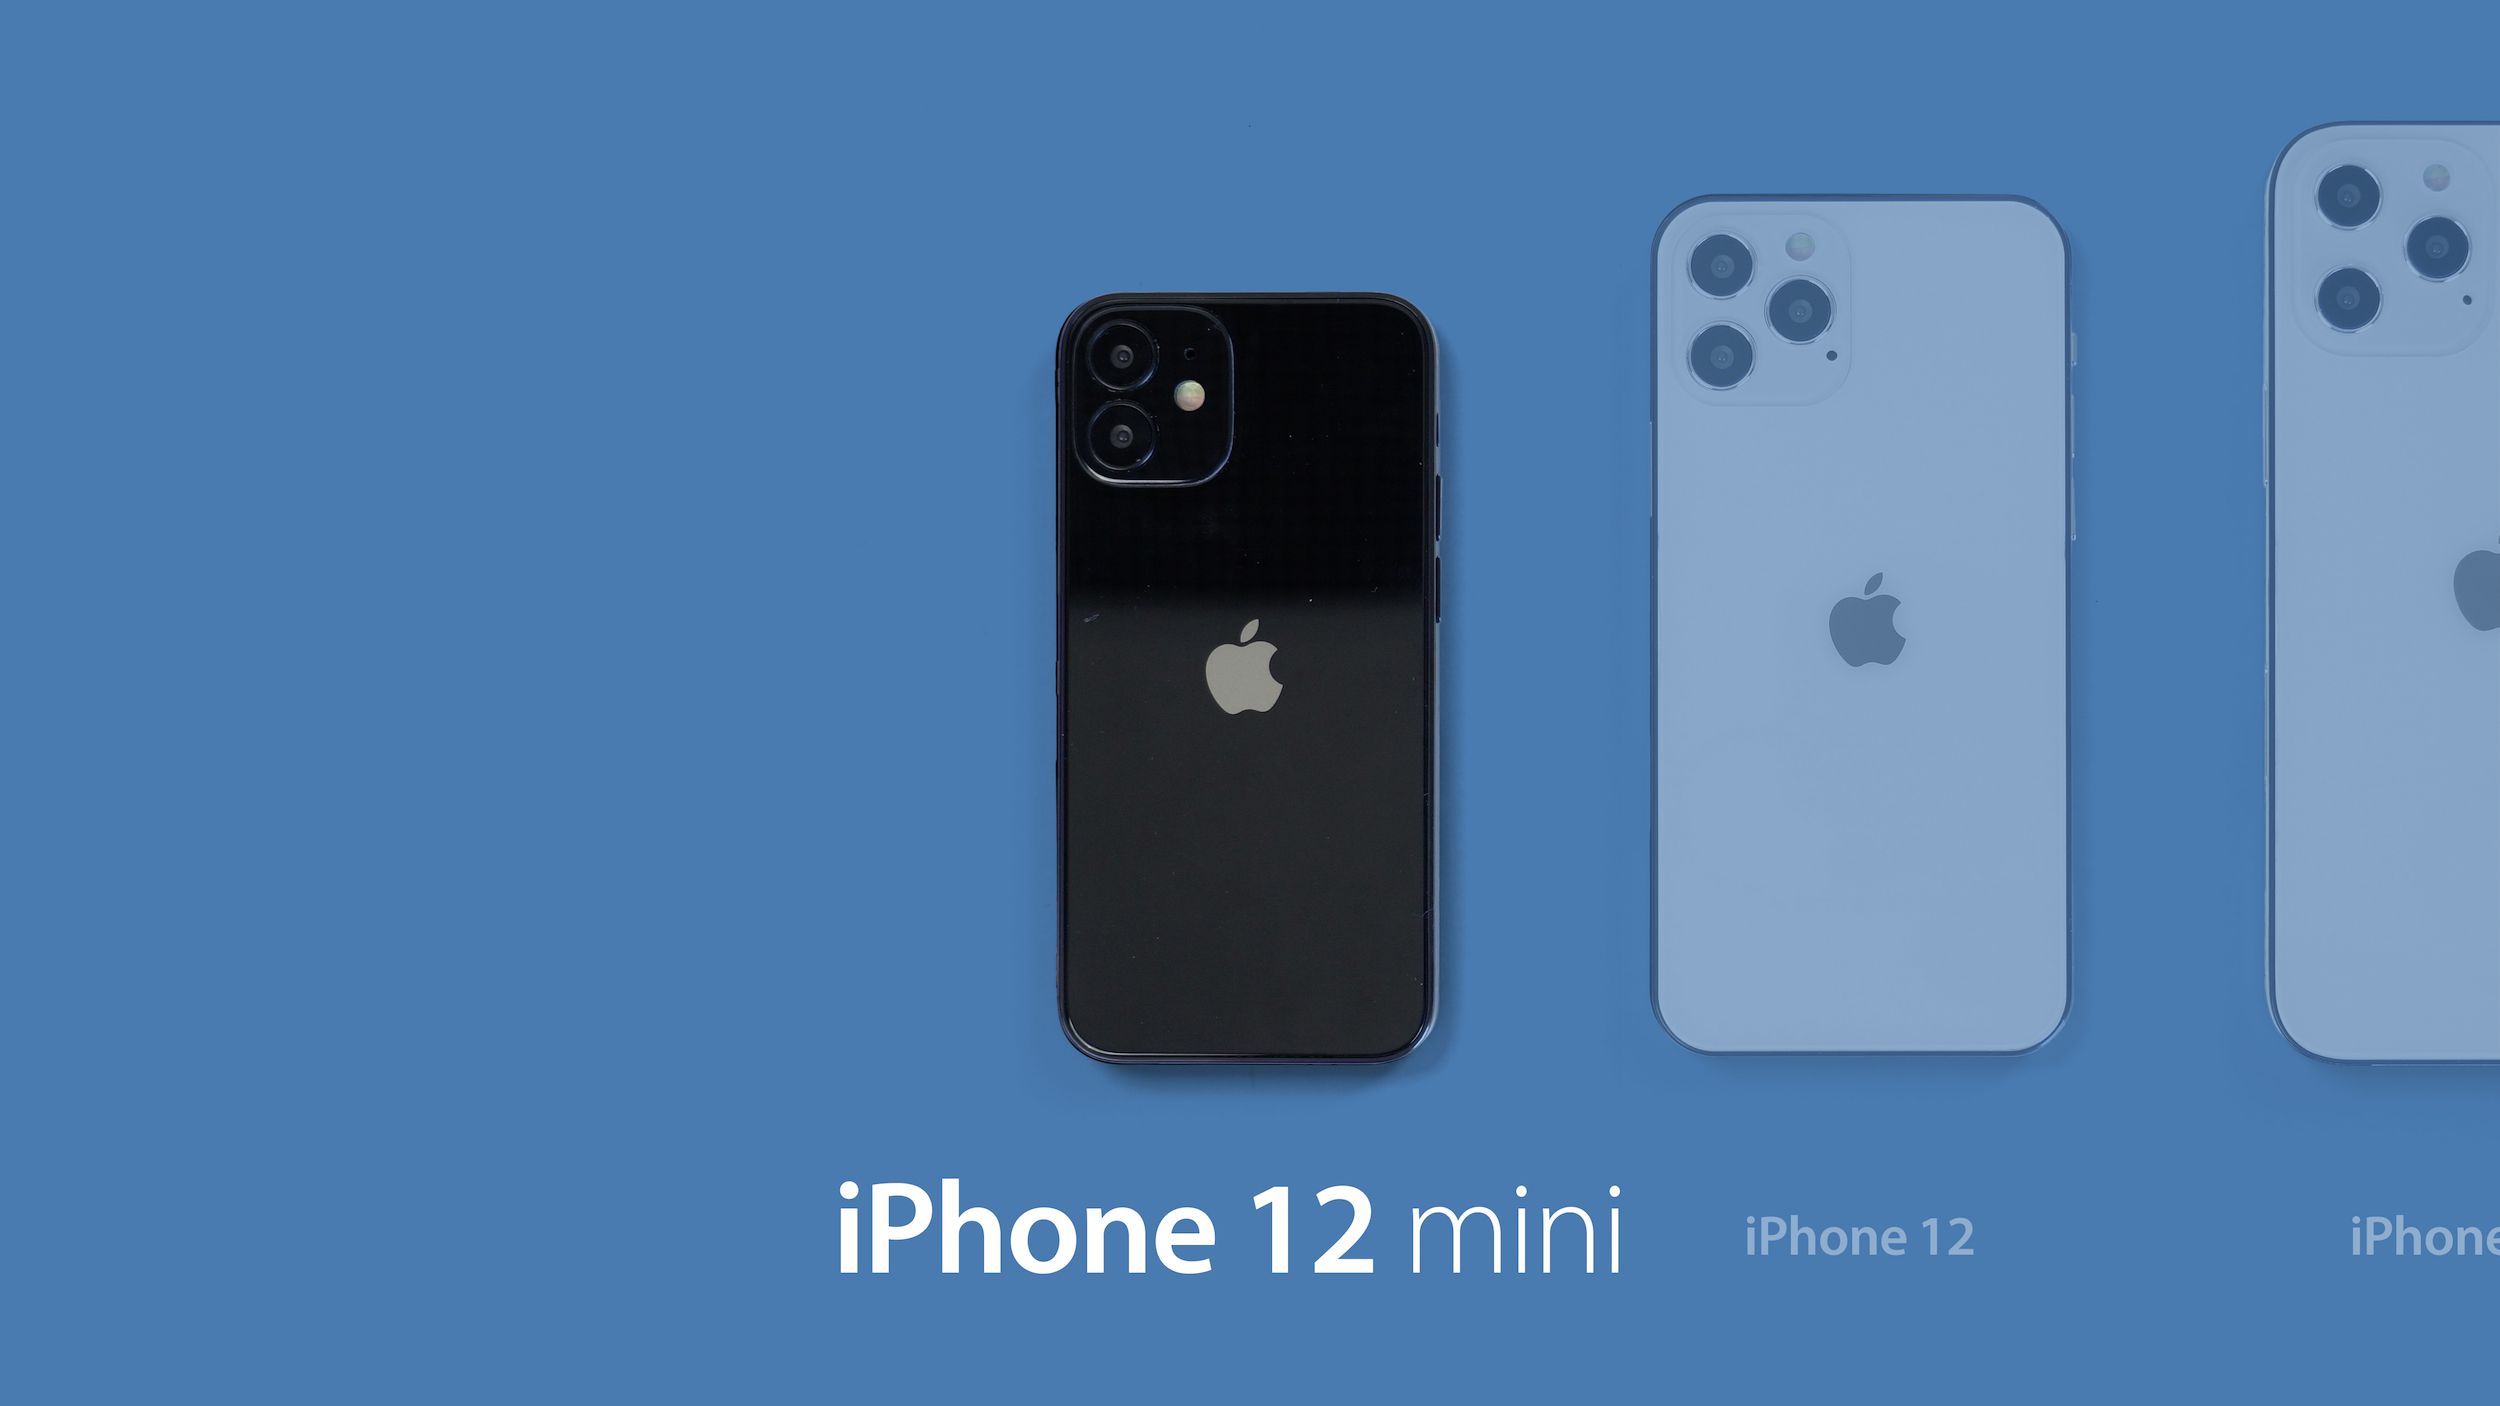 Iphone 12 Lineup Rumored To Be Named 'Iphone 12 Mini,' 'Iphone 12,' 'Iphone  12 Pro,' And 'Iphone 12 Pro Max' - Macrumors